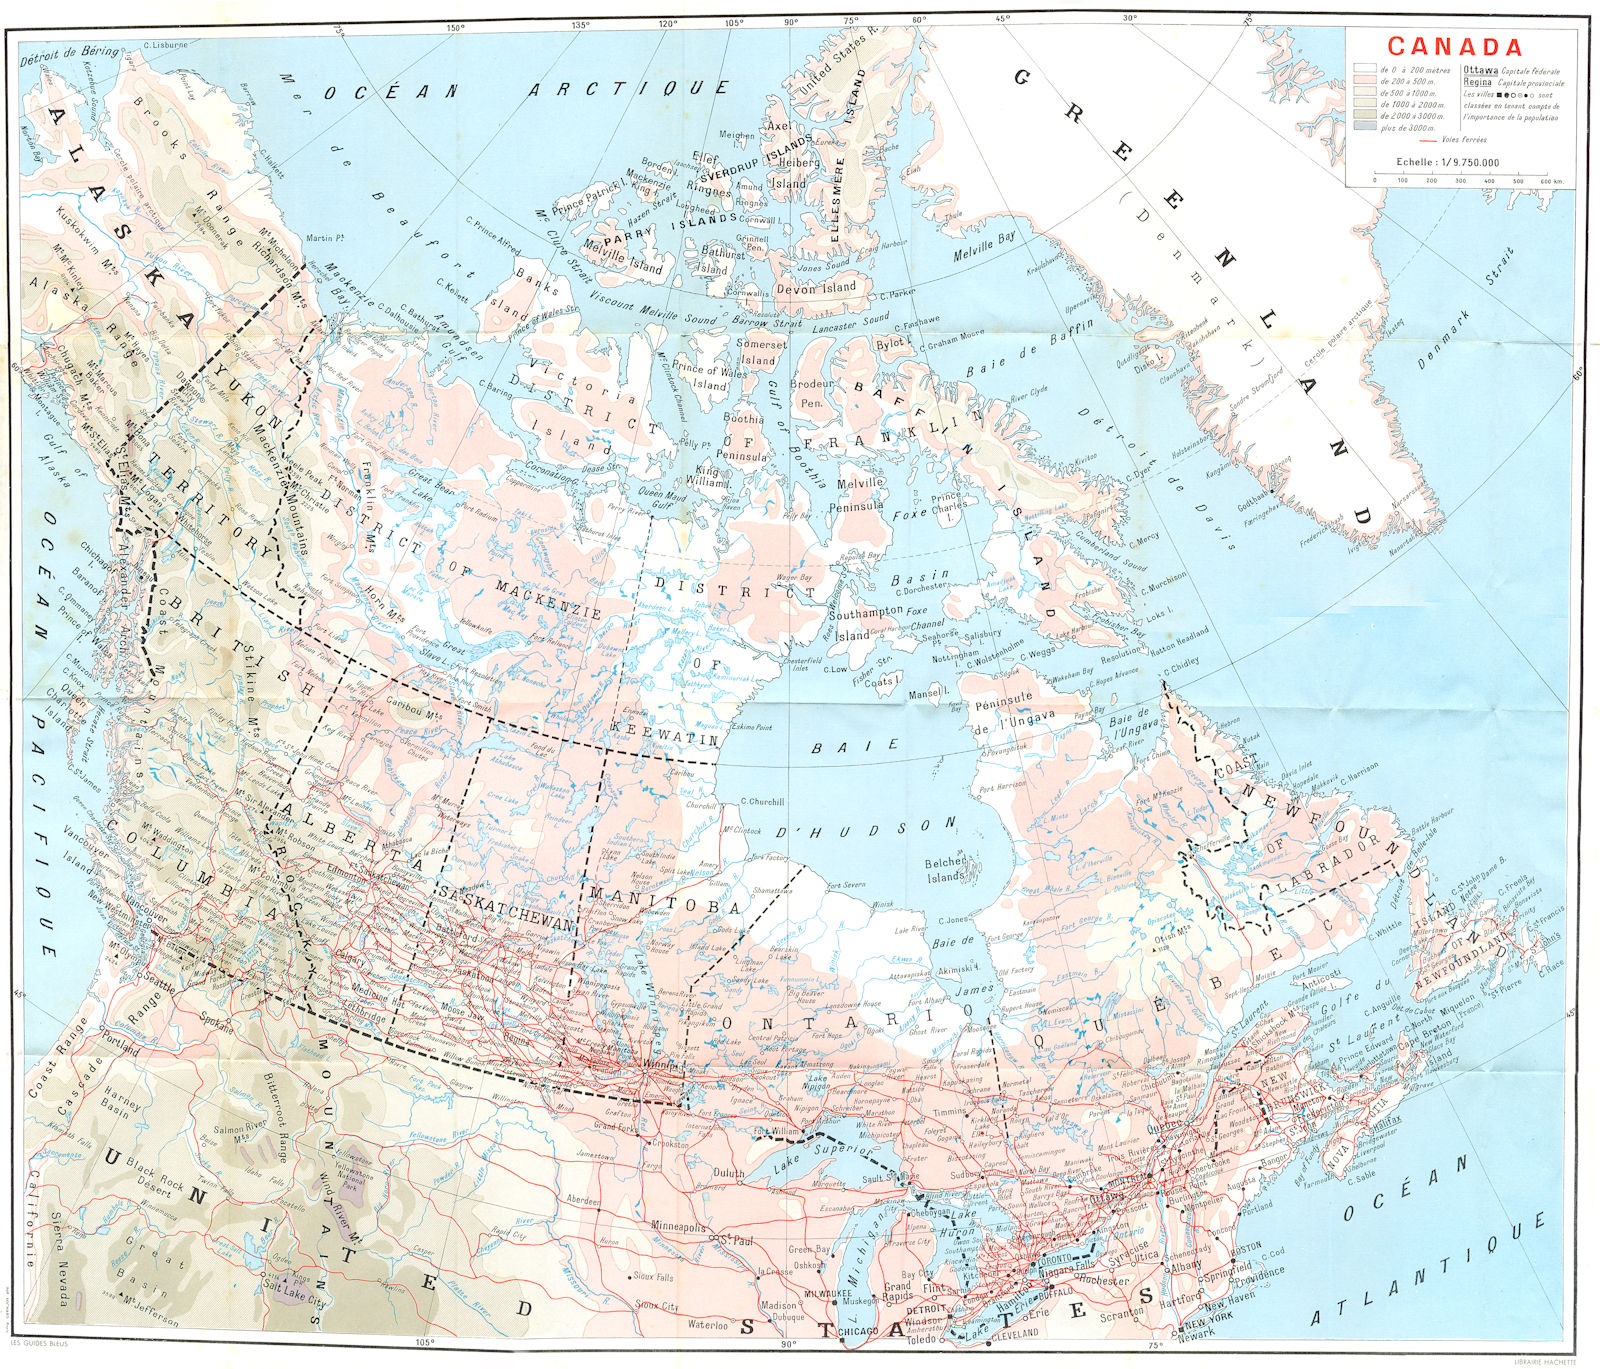 CANADA. Canada 1967 old vintage map plan chart